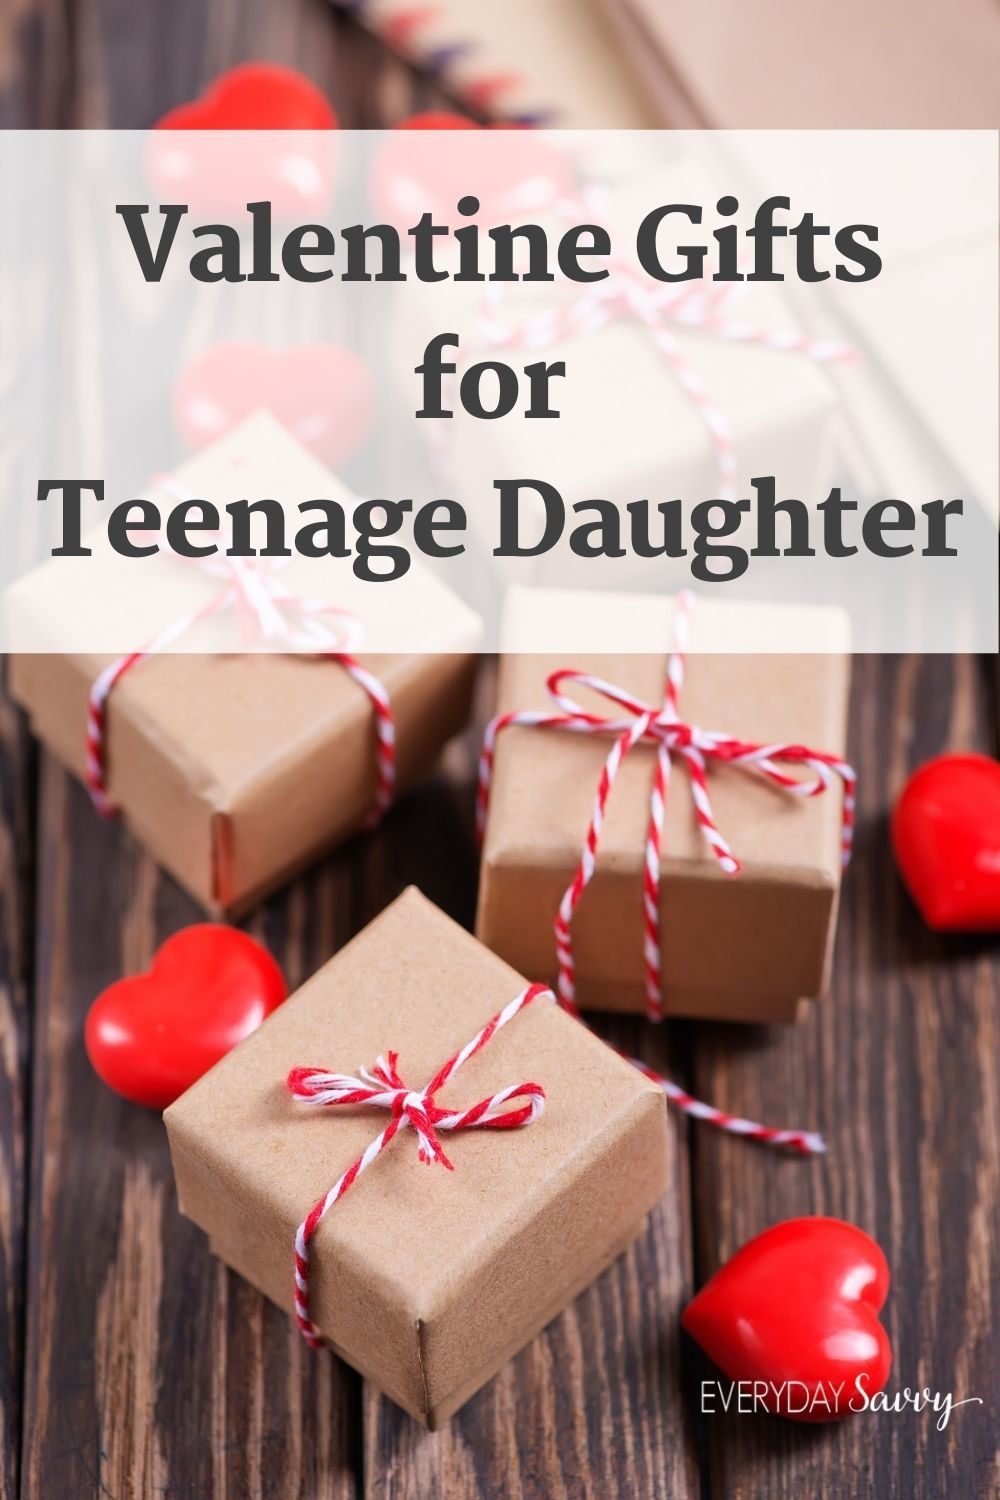 Valentine Gift Ideas For Daughter
 Valentine s Day Gifts for Teenage Daughter Everyday Savvy